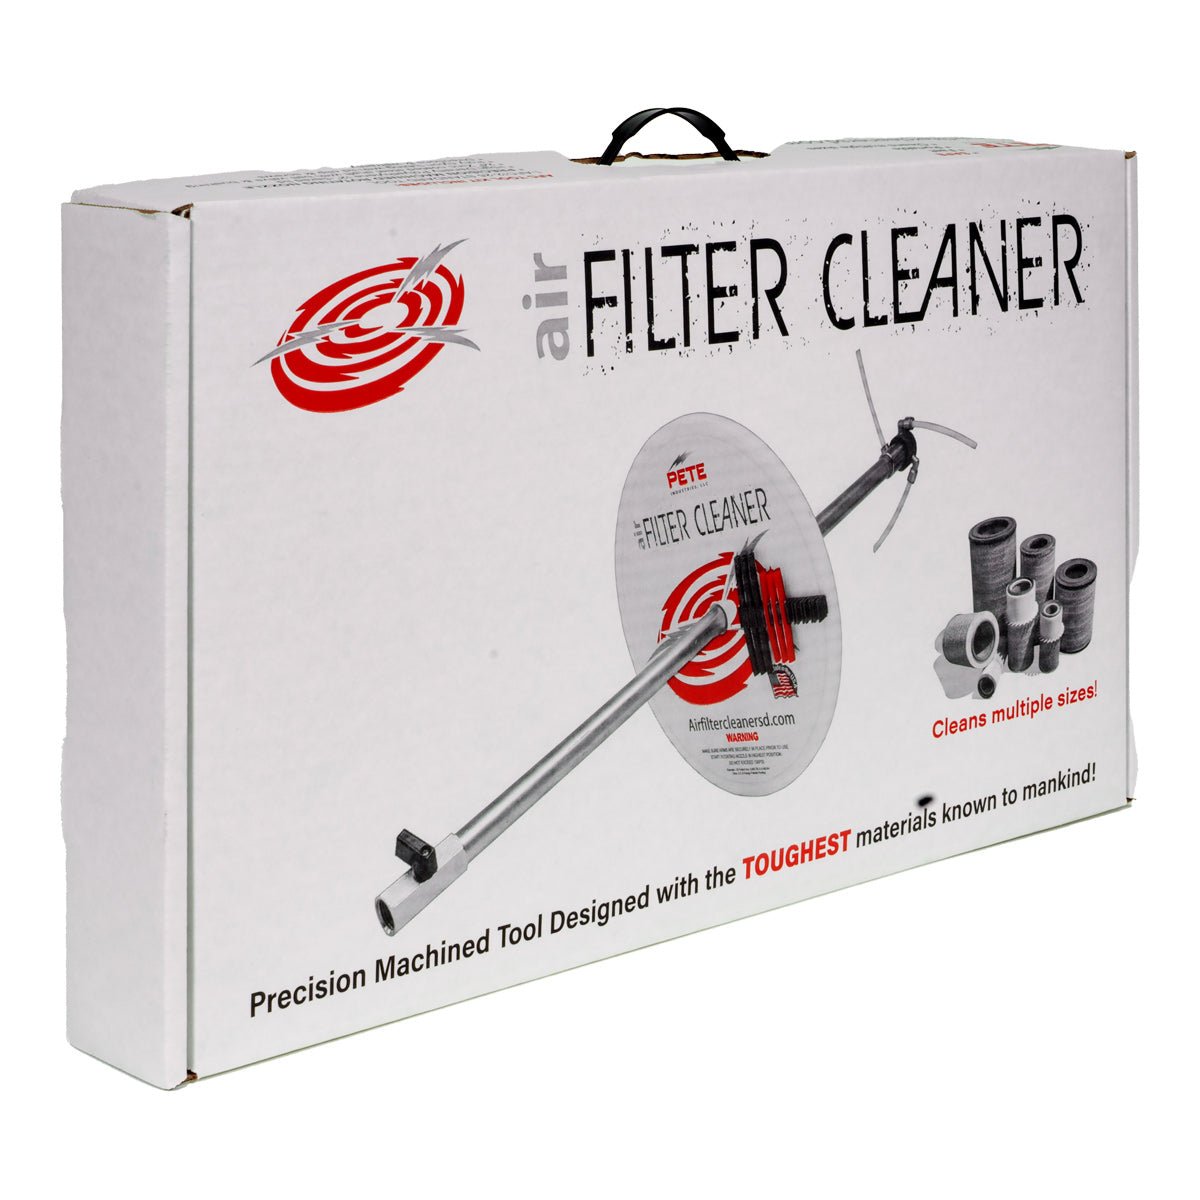 Air Filter Cleaner XL Tool Kit | Air Filter Cleaner